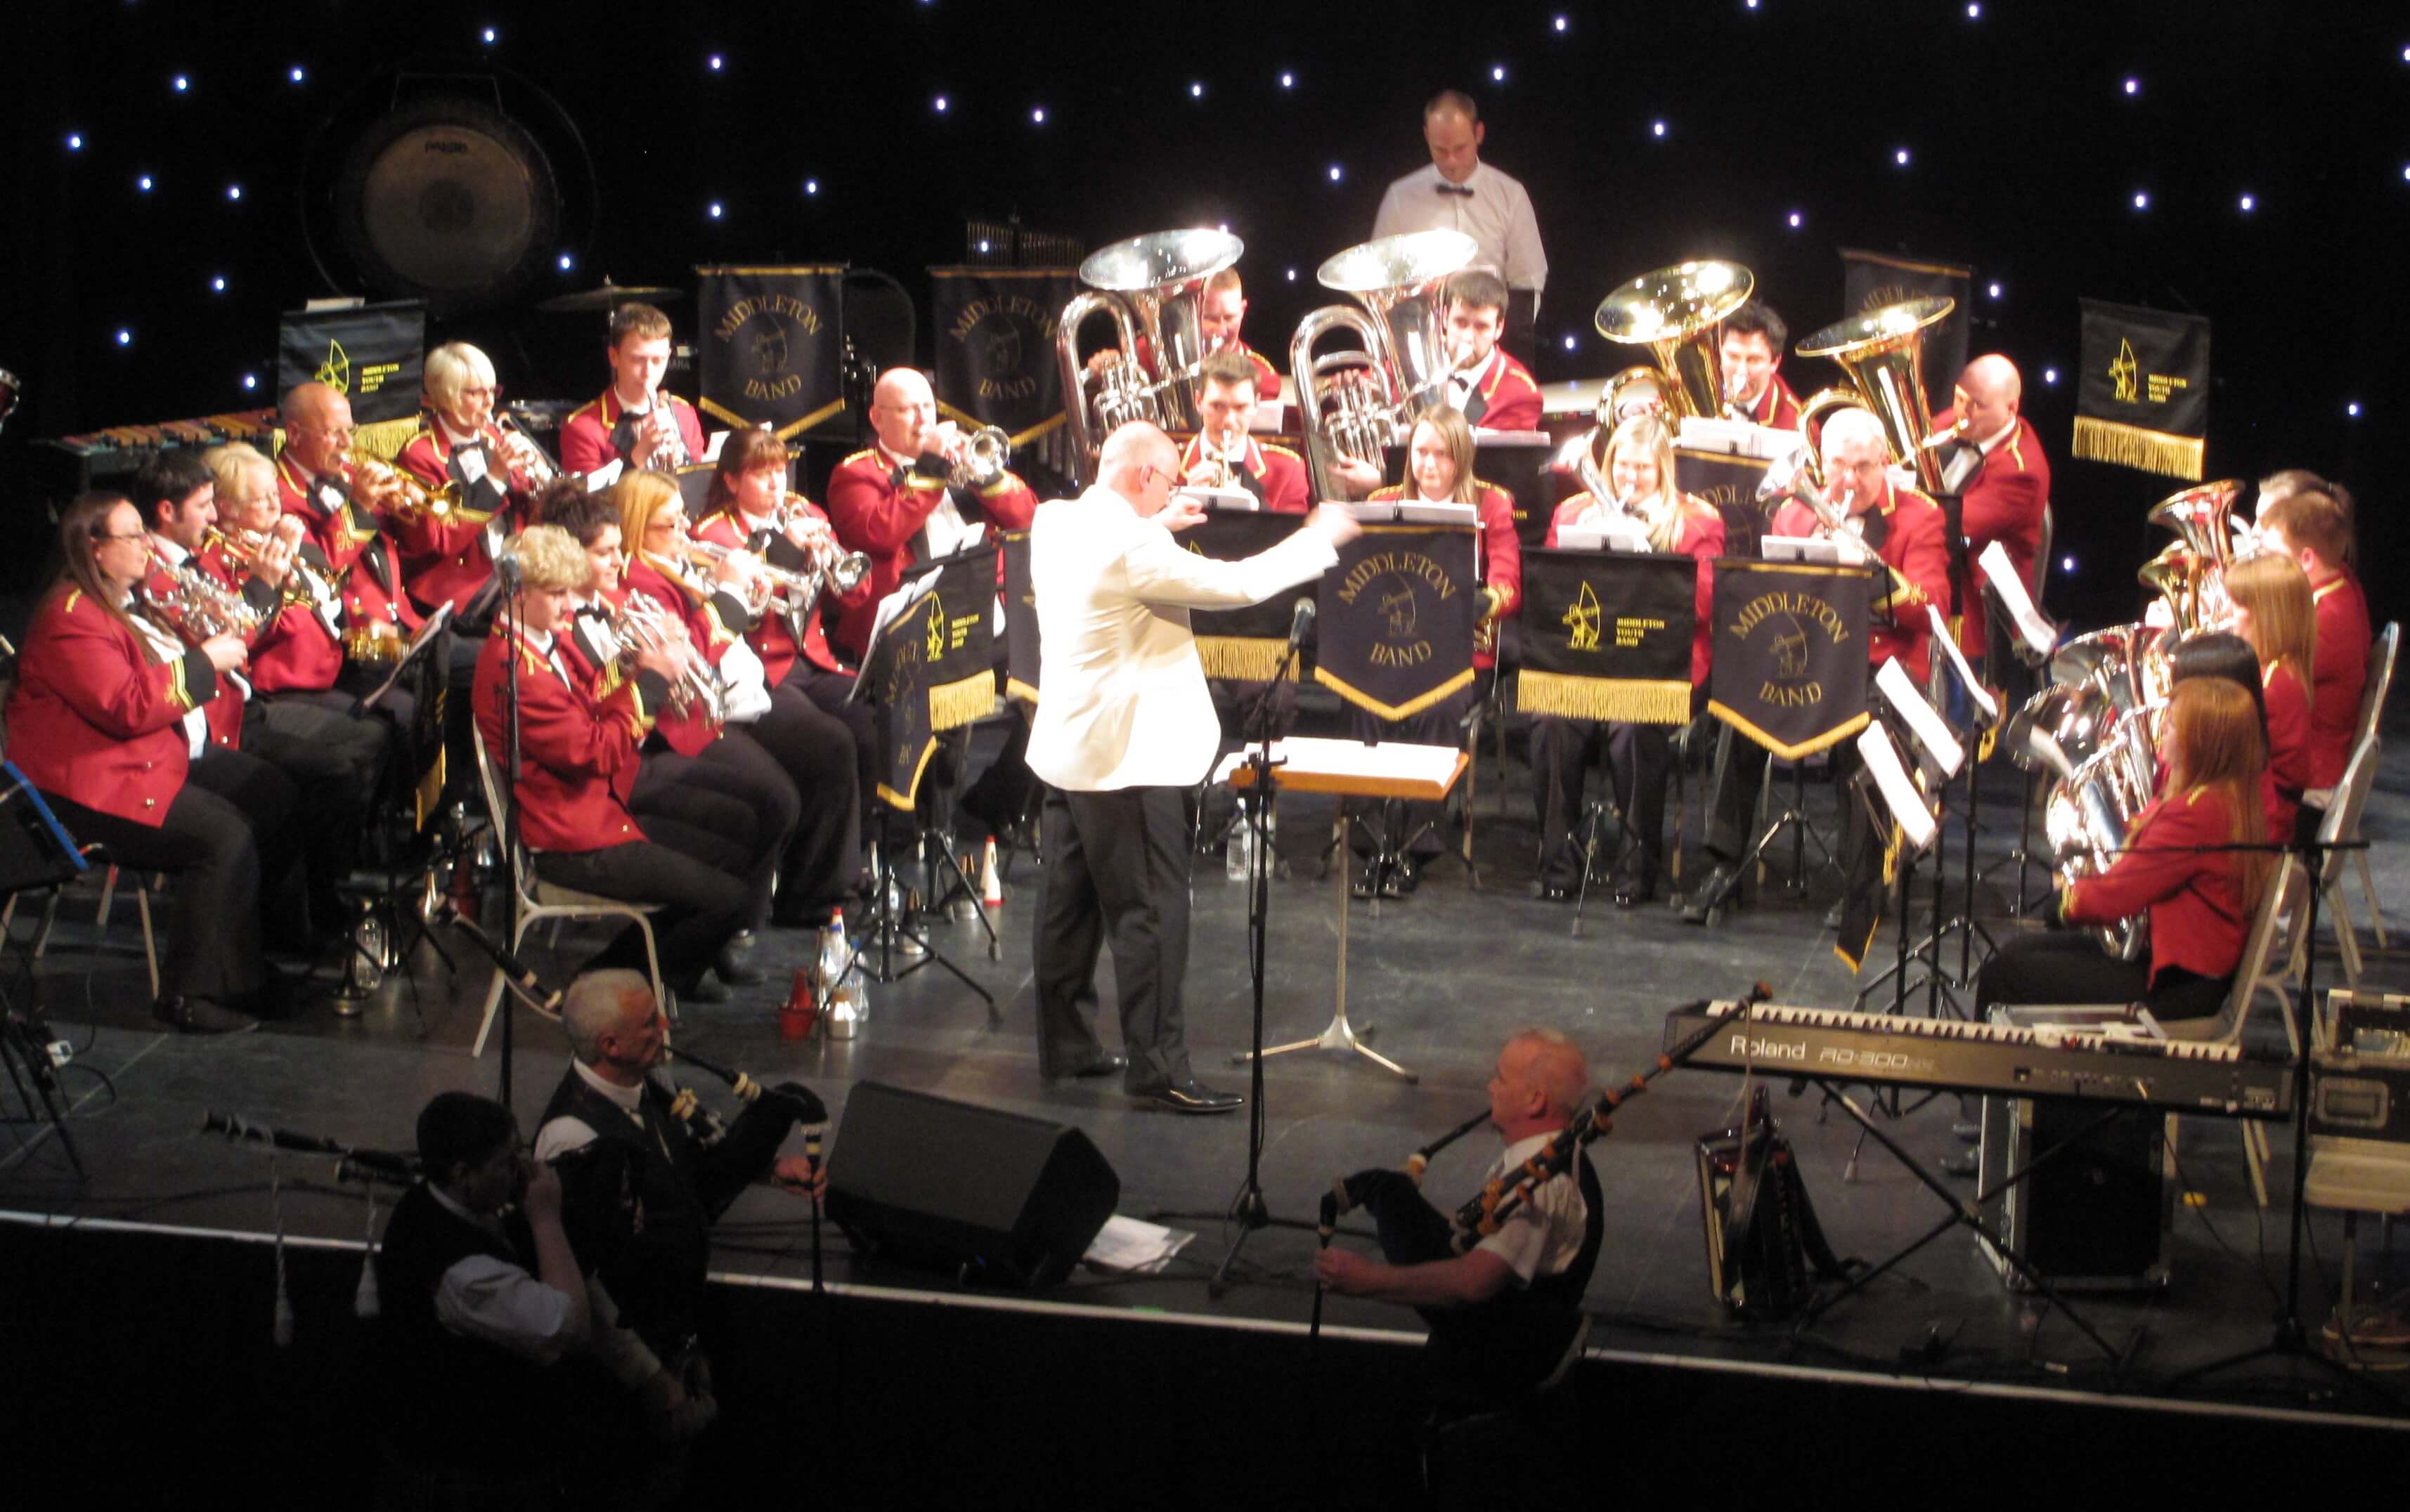 Middleton band play Highland Cathedral with special guests Manchester Community Pipe band.